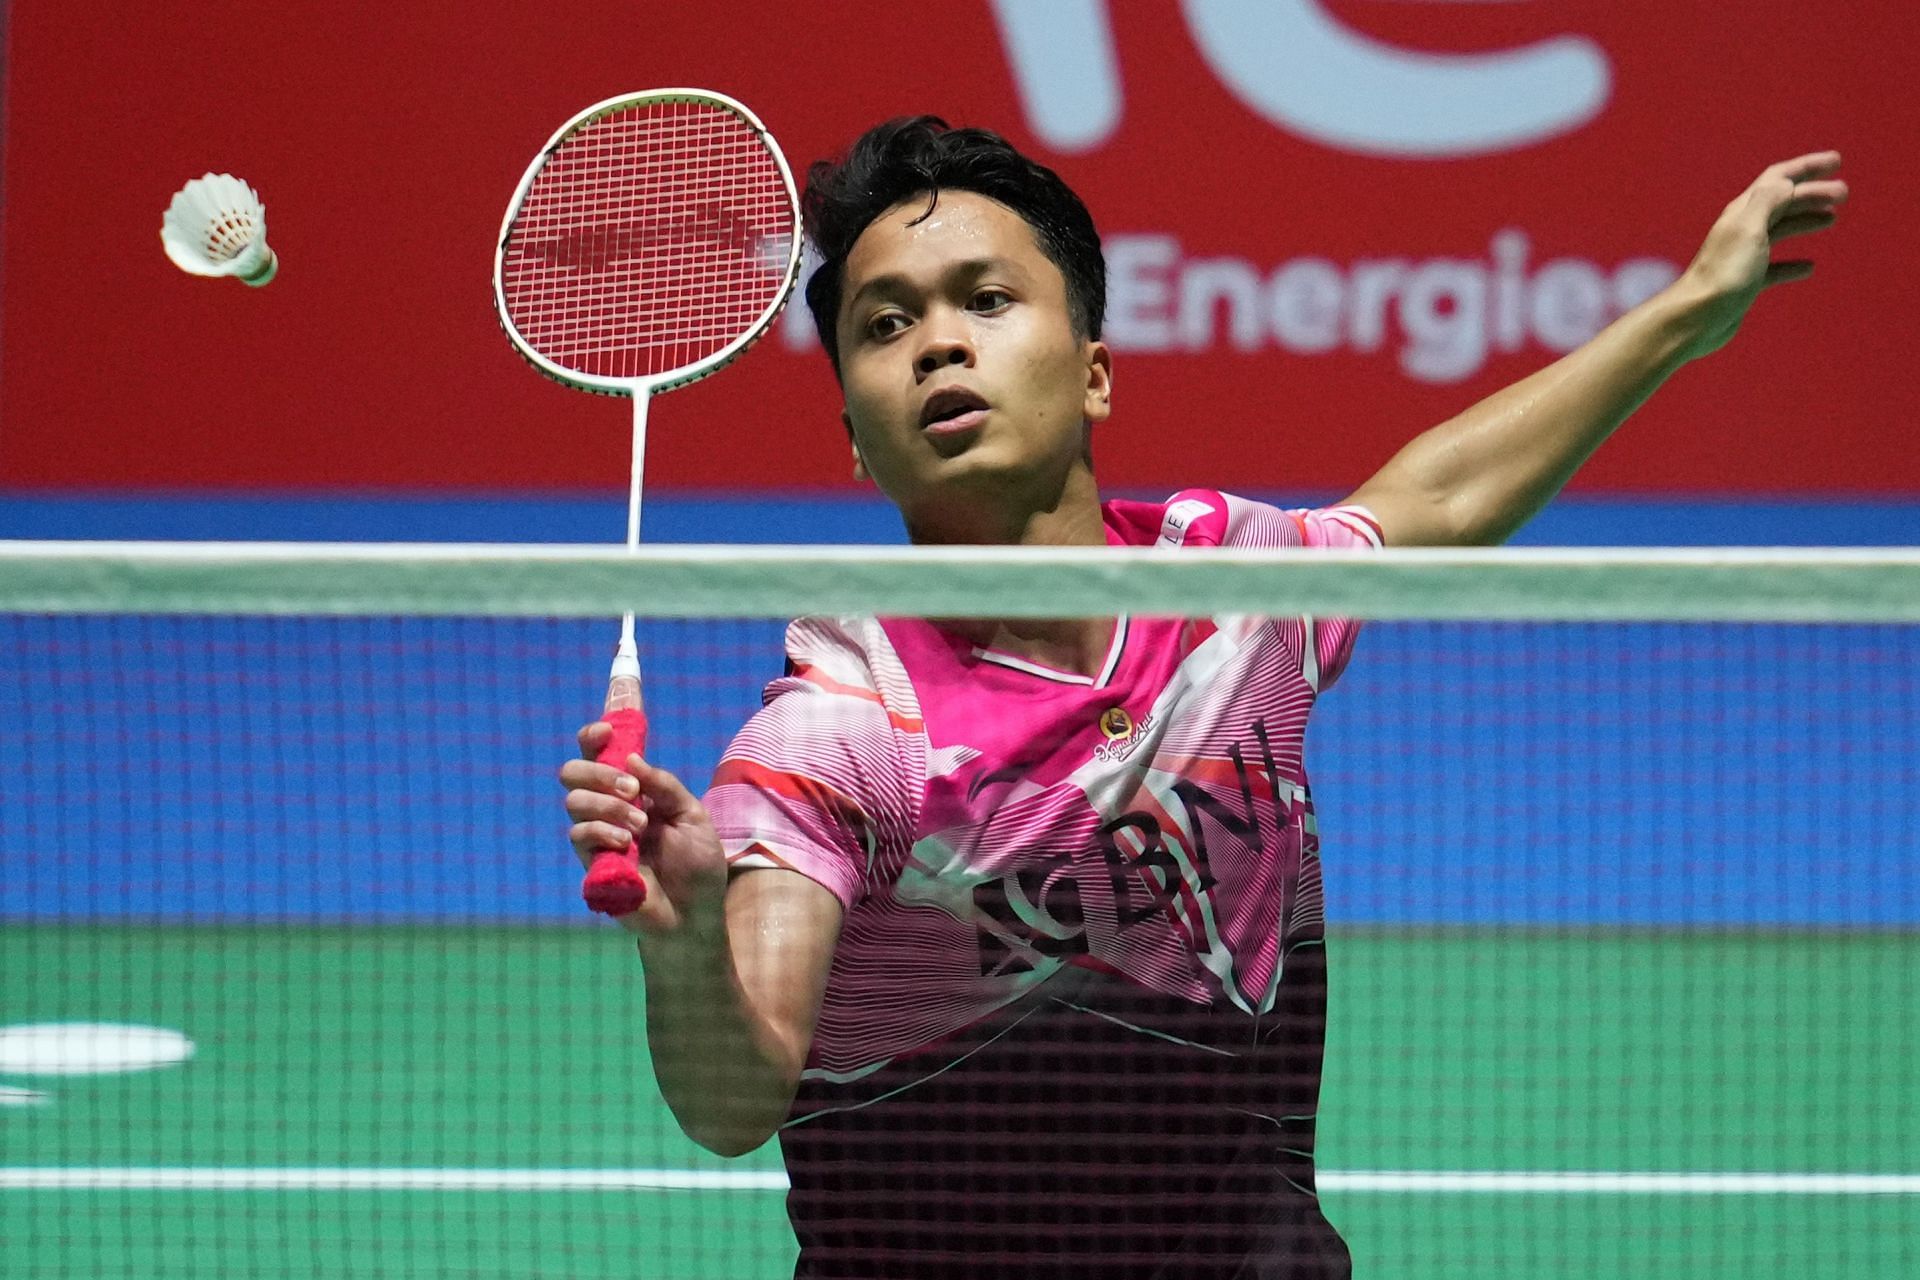 Ginting in action at the 2022 BWF World Championships (Image courtesy: Getty Images)